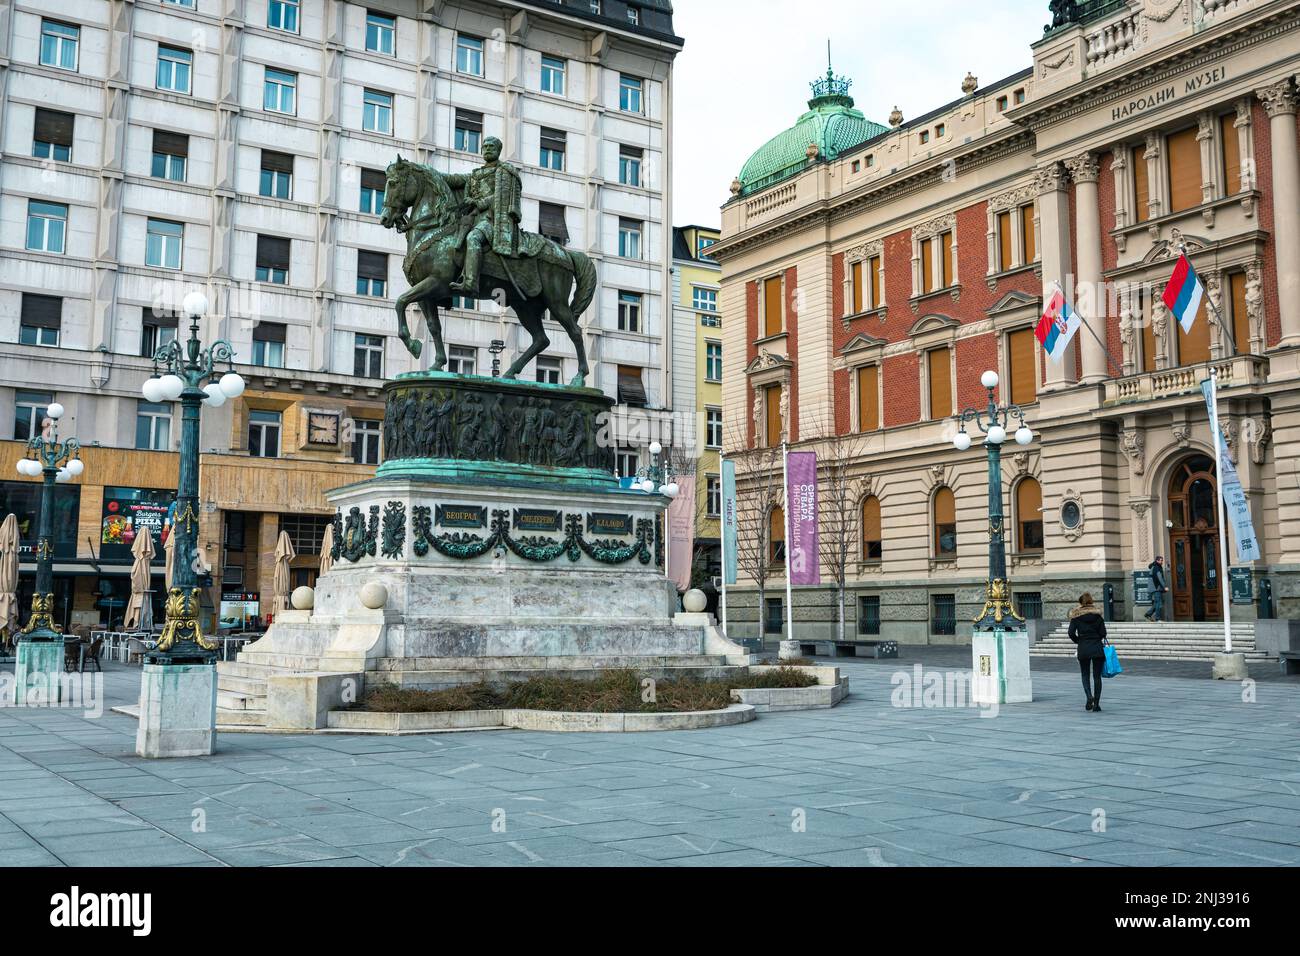 The Republic Square (Trg Republike in Serbian) with old Baroque style buildings, the statue of Prince Michael and the National Museum. Stock Photo